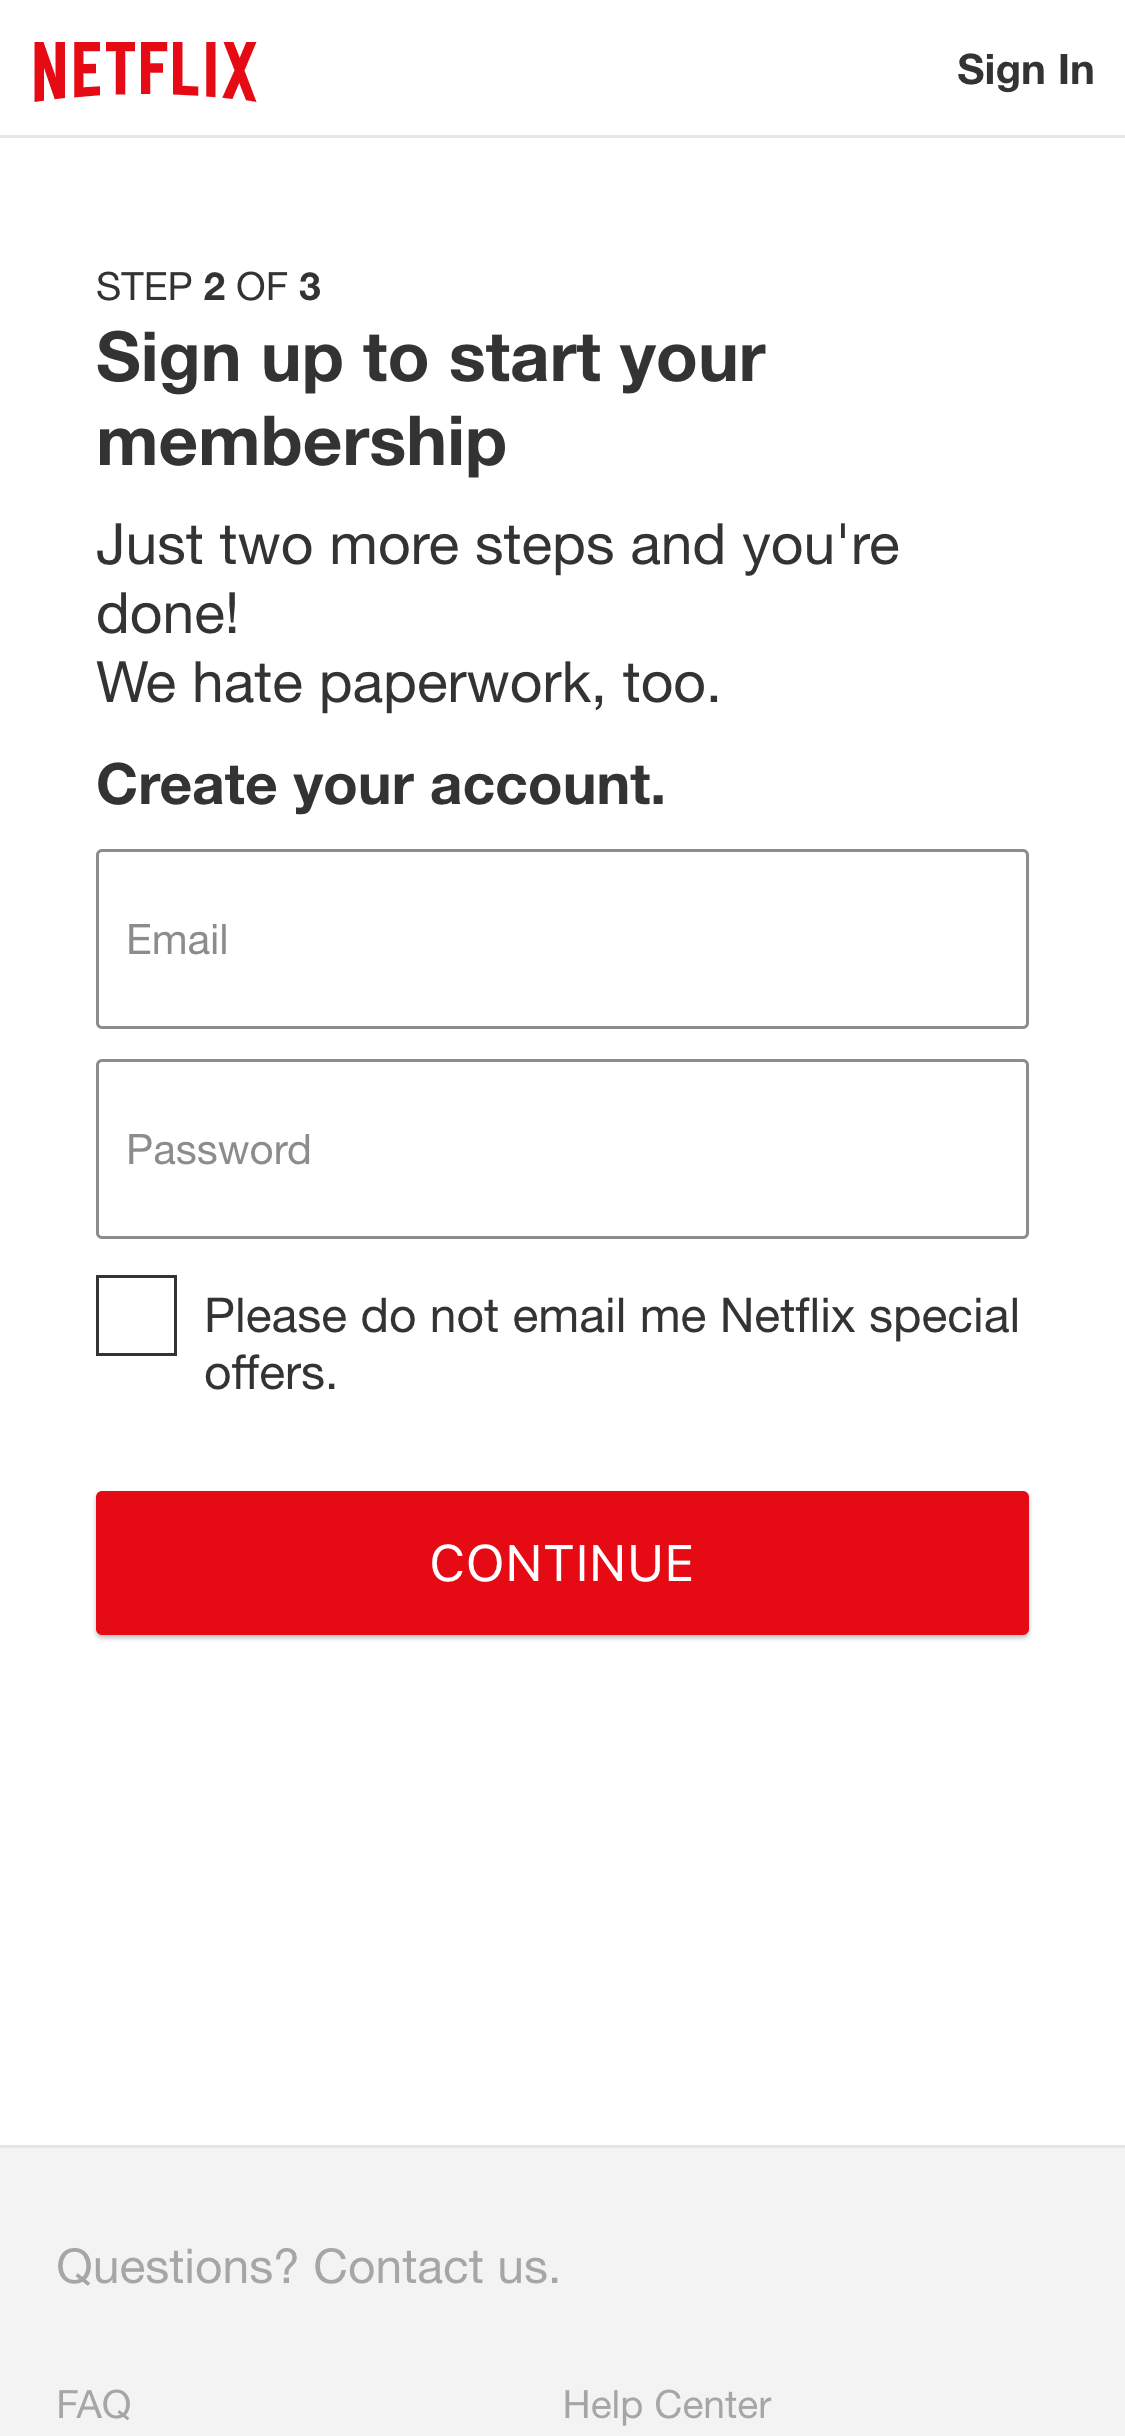 Netflix - HOW TO SIGN UP - SmarTone